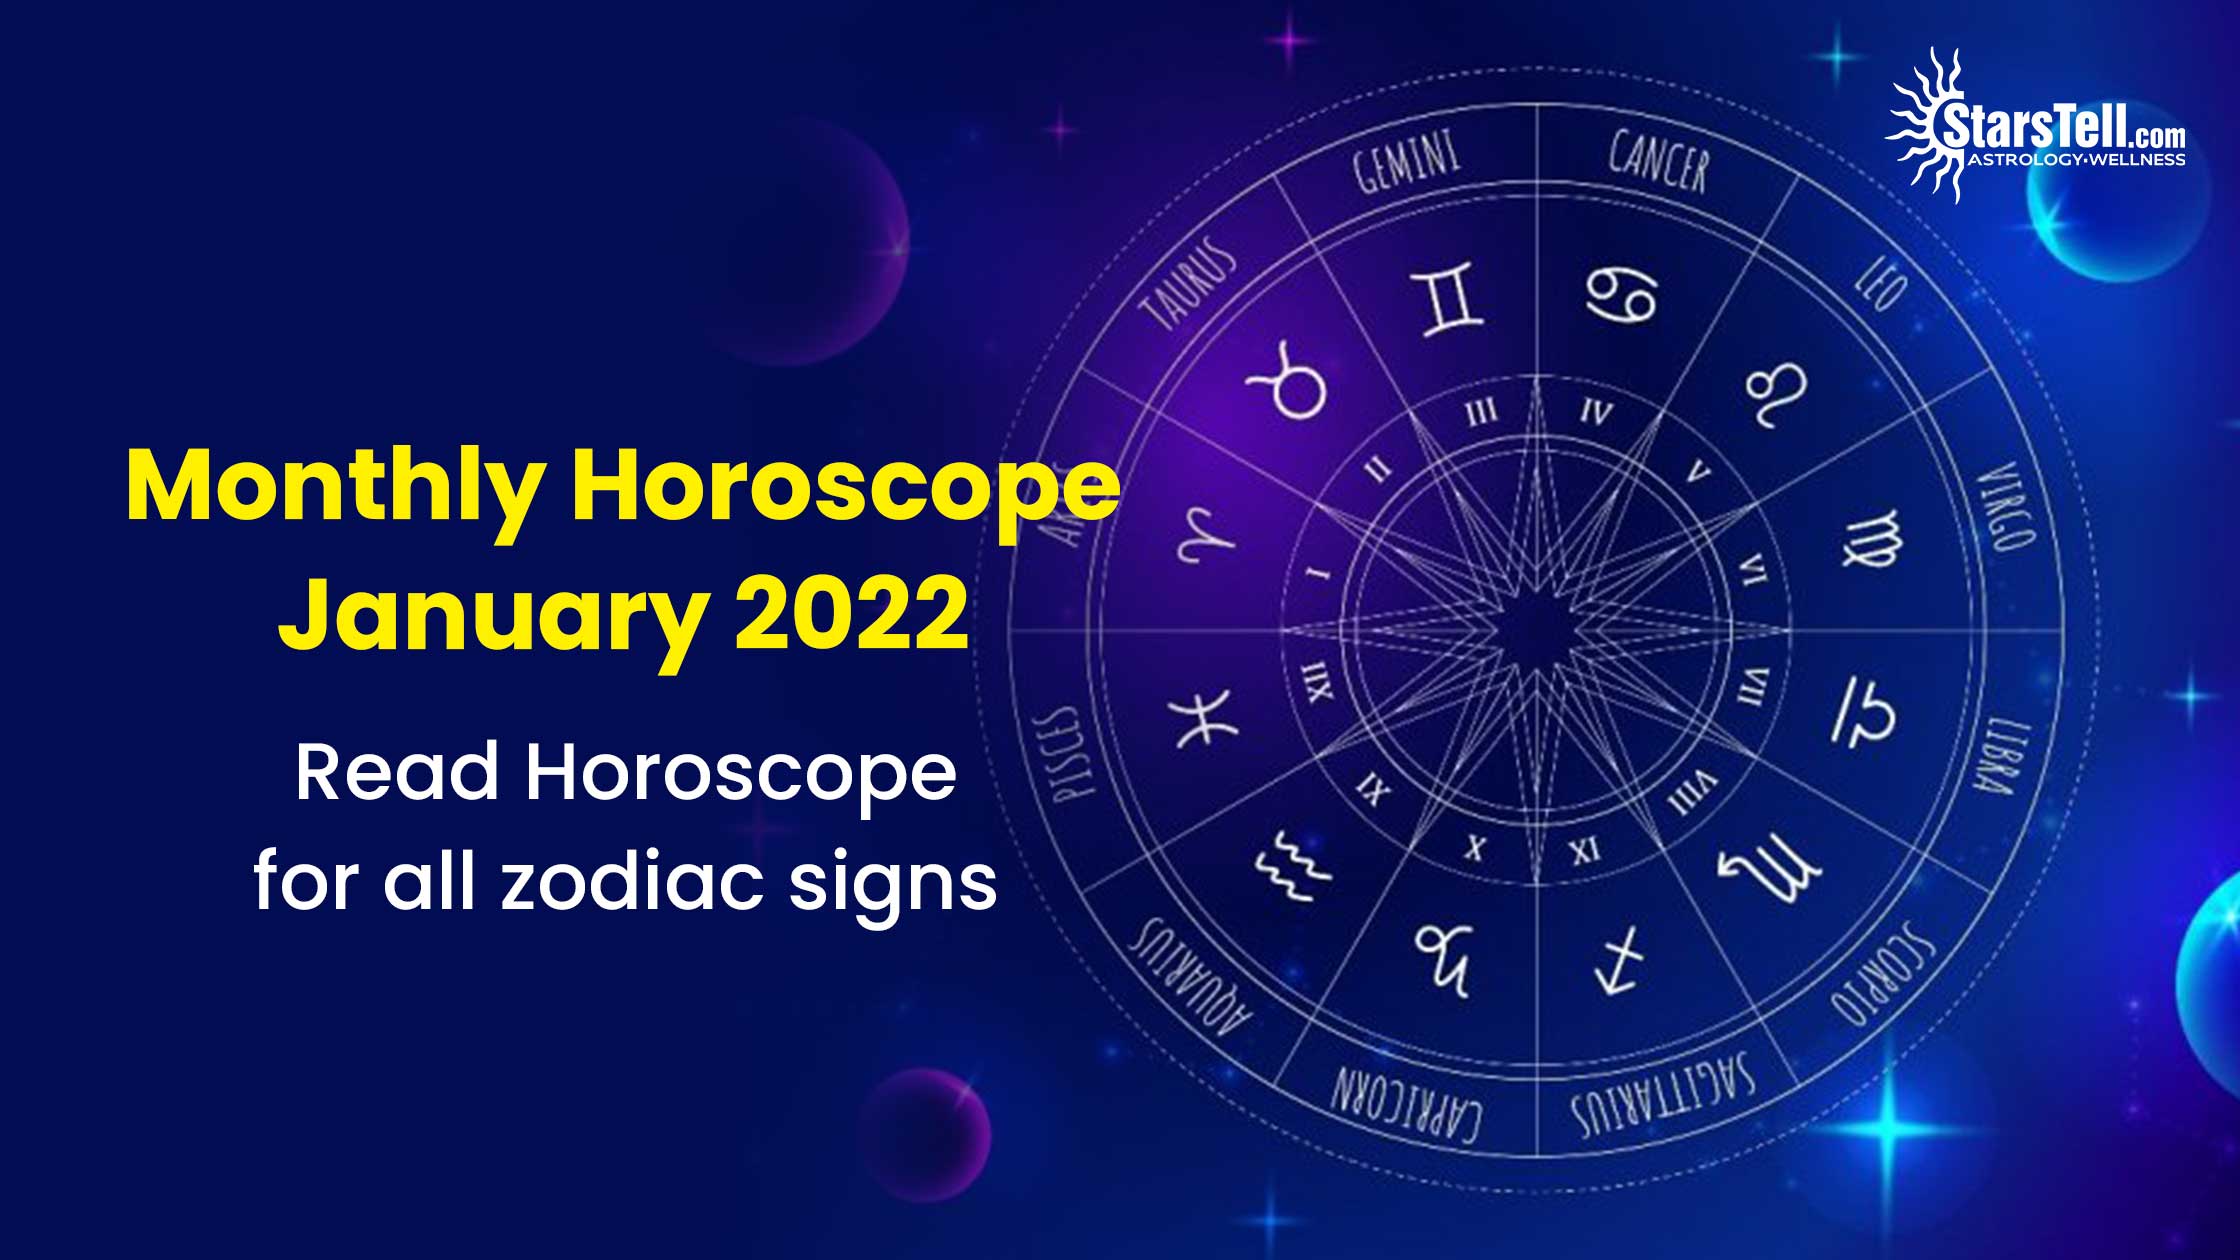 Monthly Horoscope January 2022 - Read Horoscope for all zodiac signs